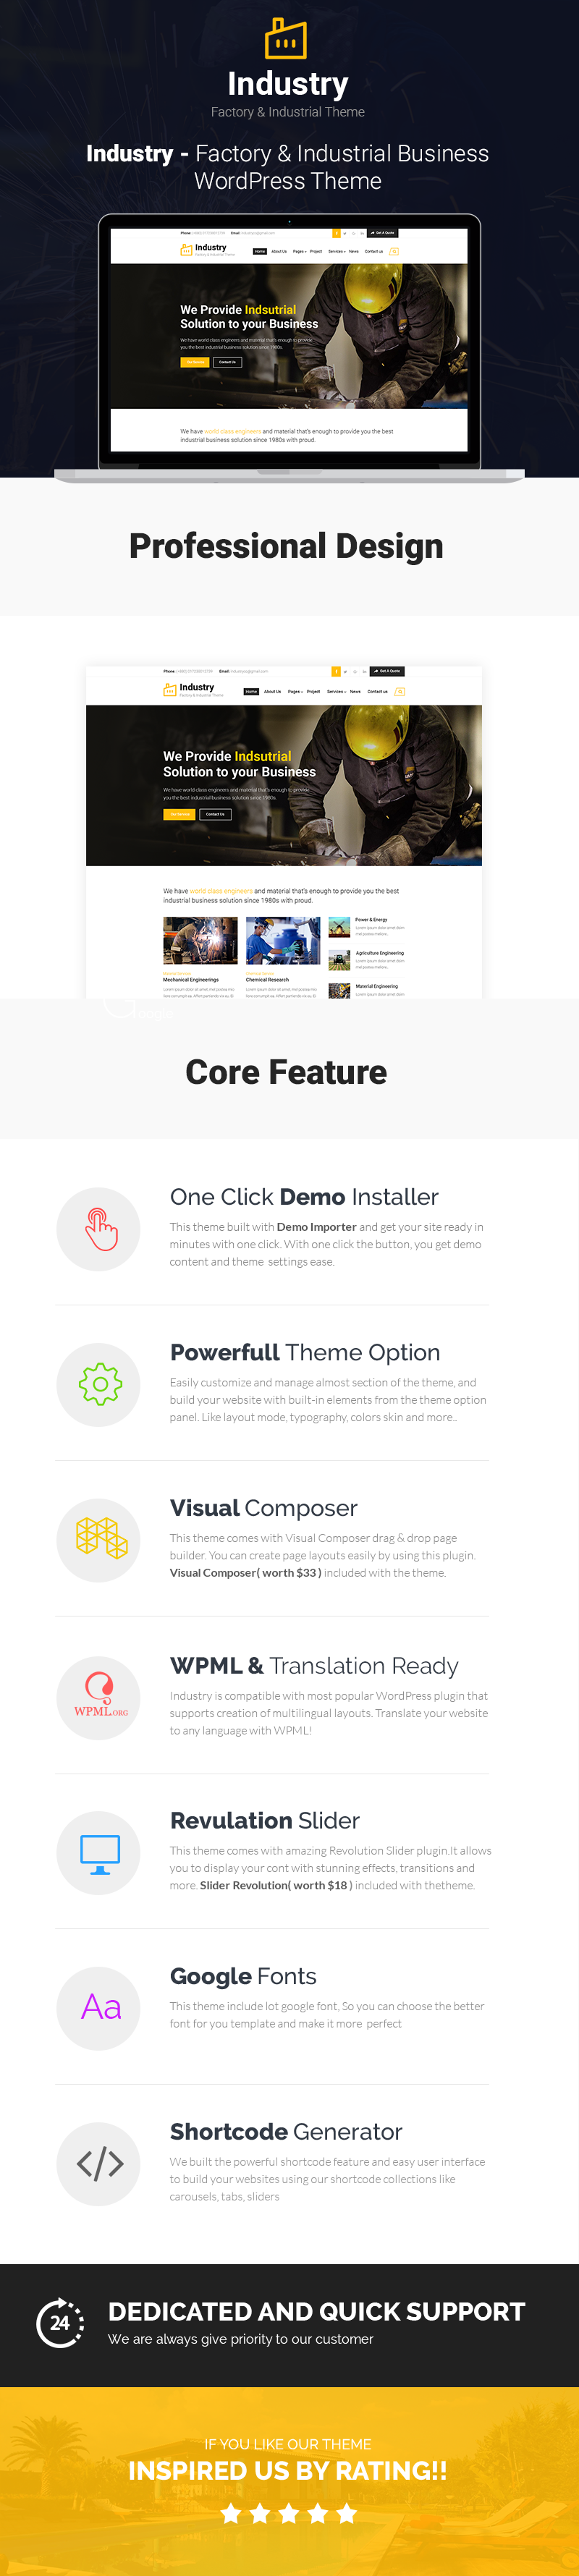 Industry - Factory & Industrial Business WordPress Theme - 1